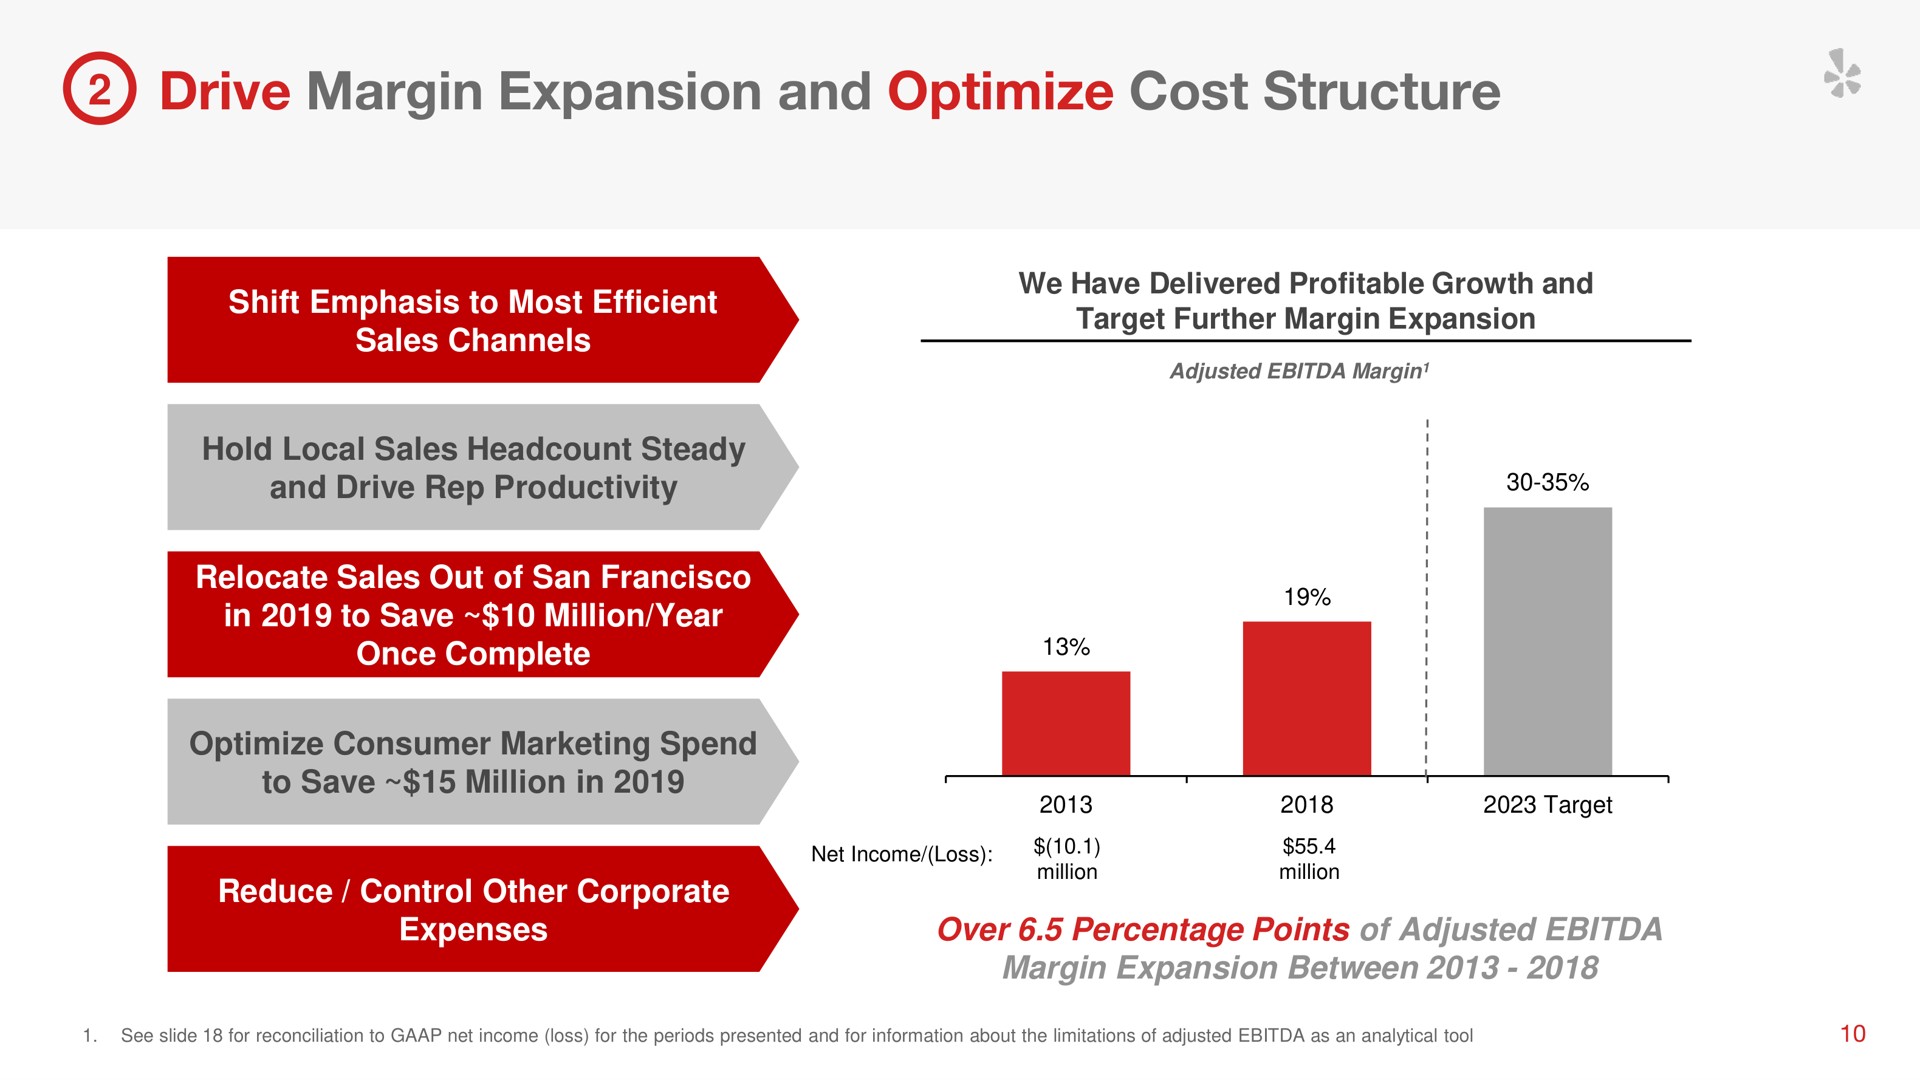 drive margin expansion and optimize cost structure | Yelp